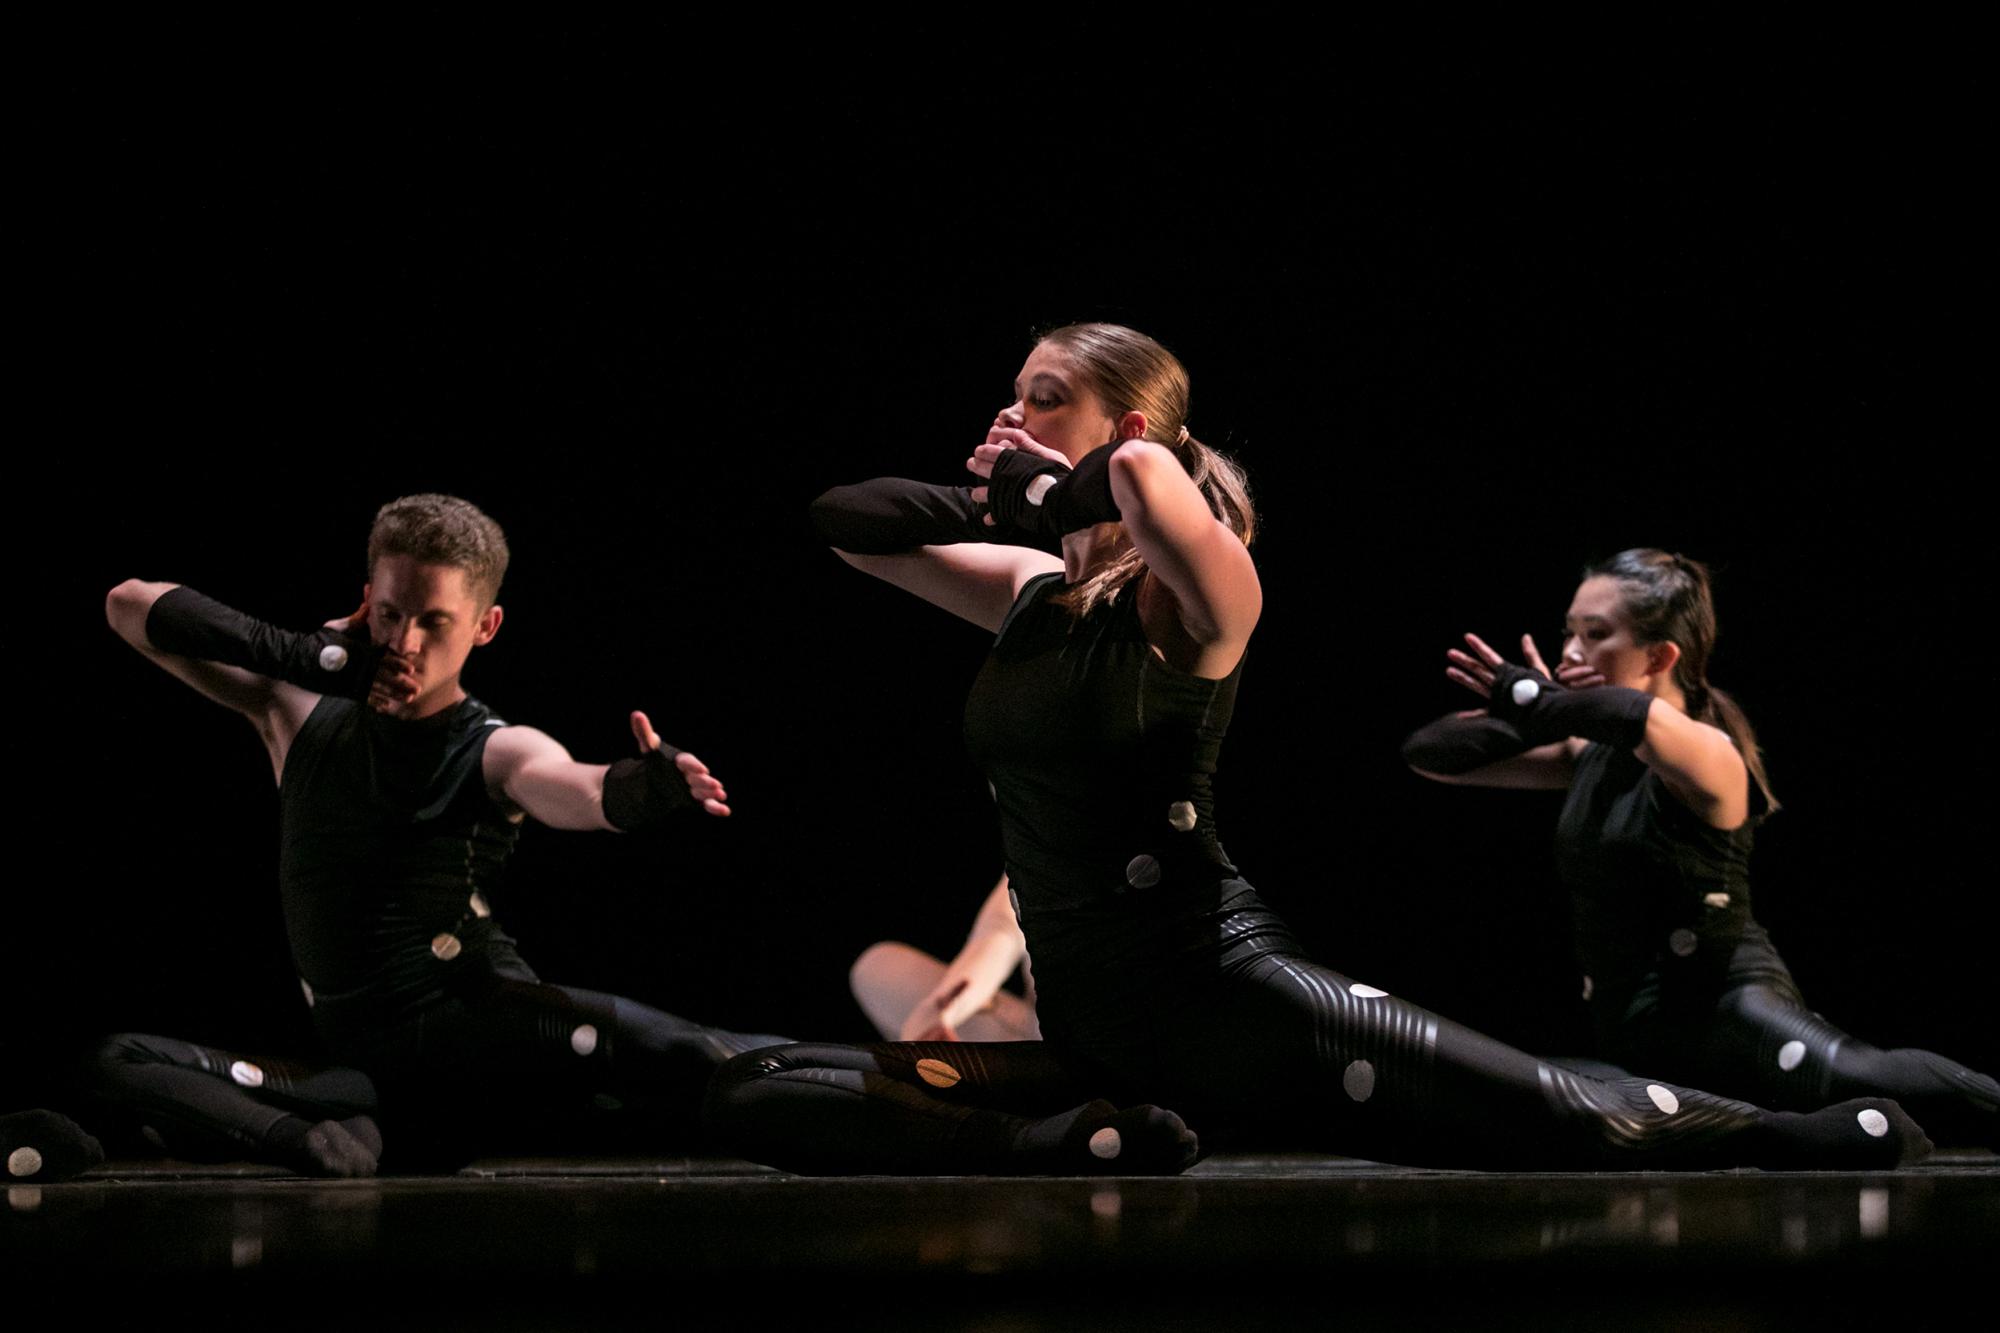 2018 Fall For Dance production of Invention in Three Parts